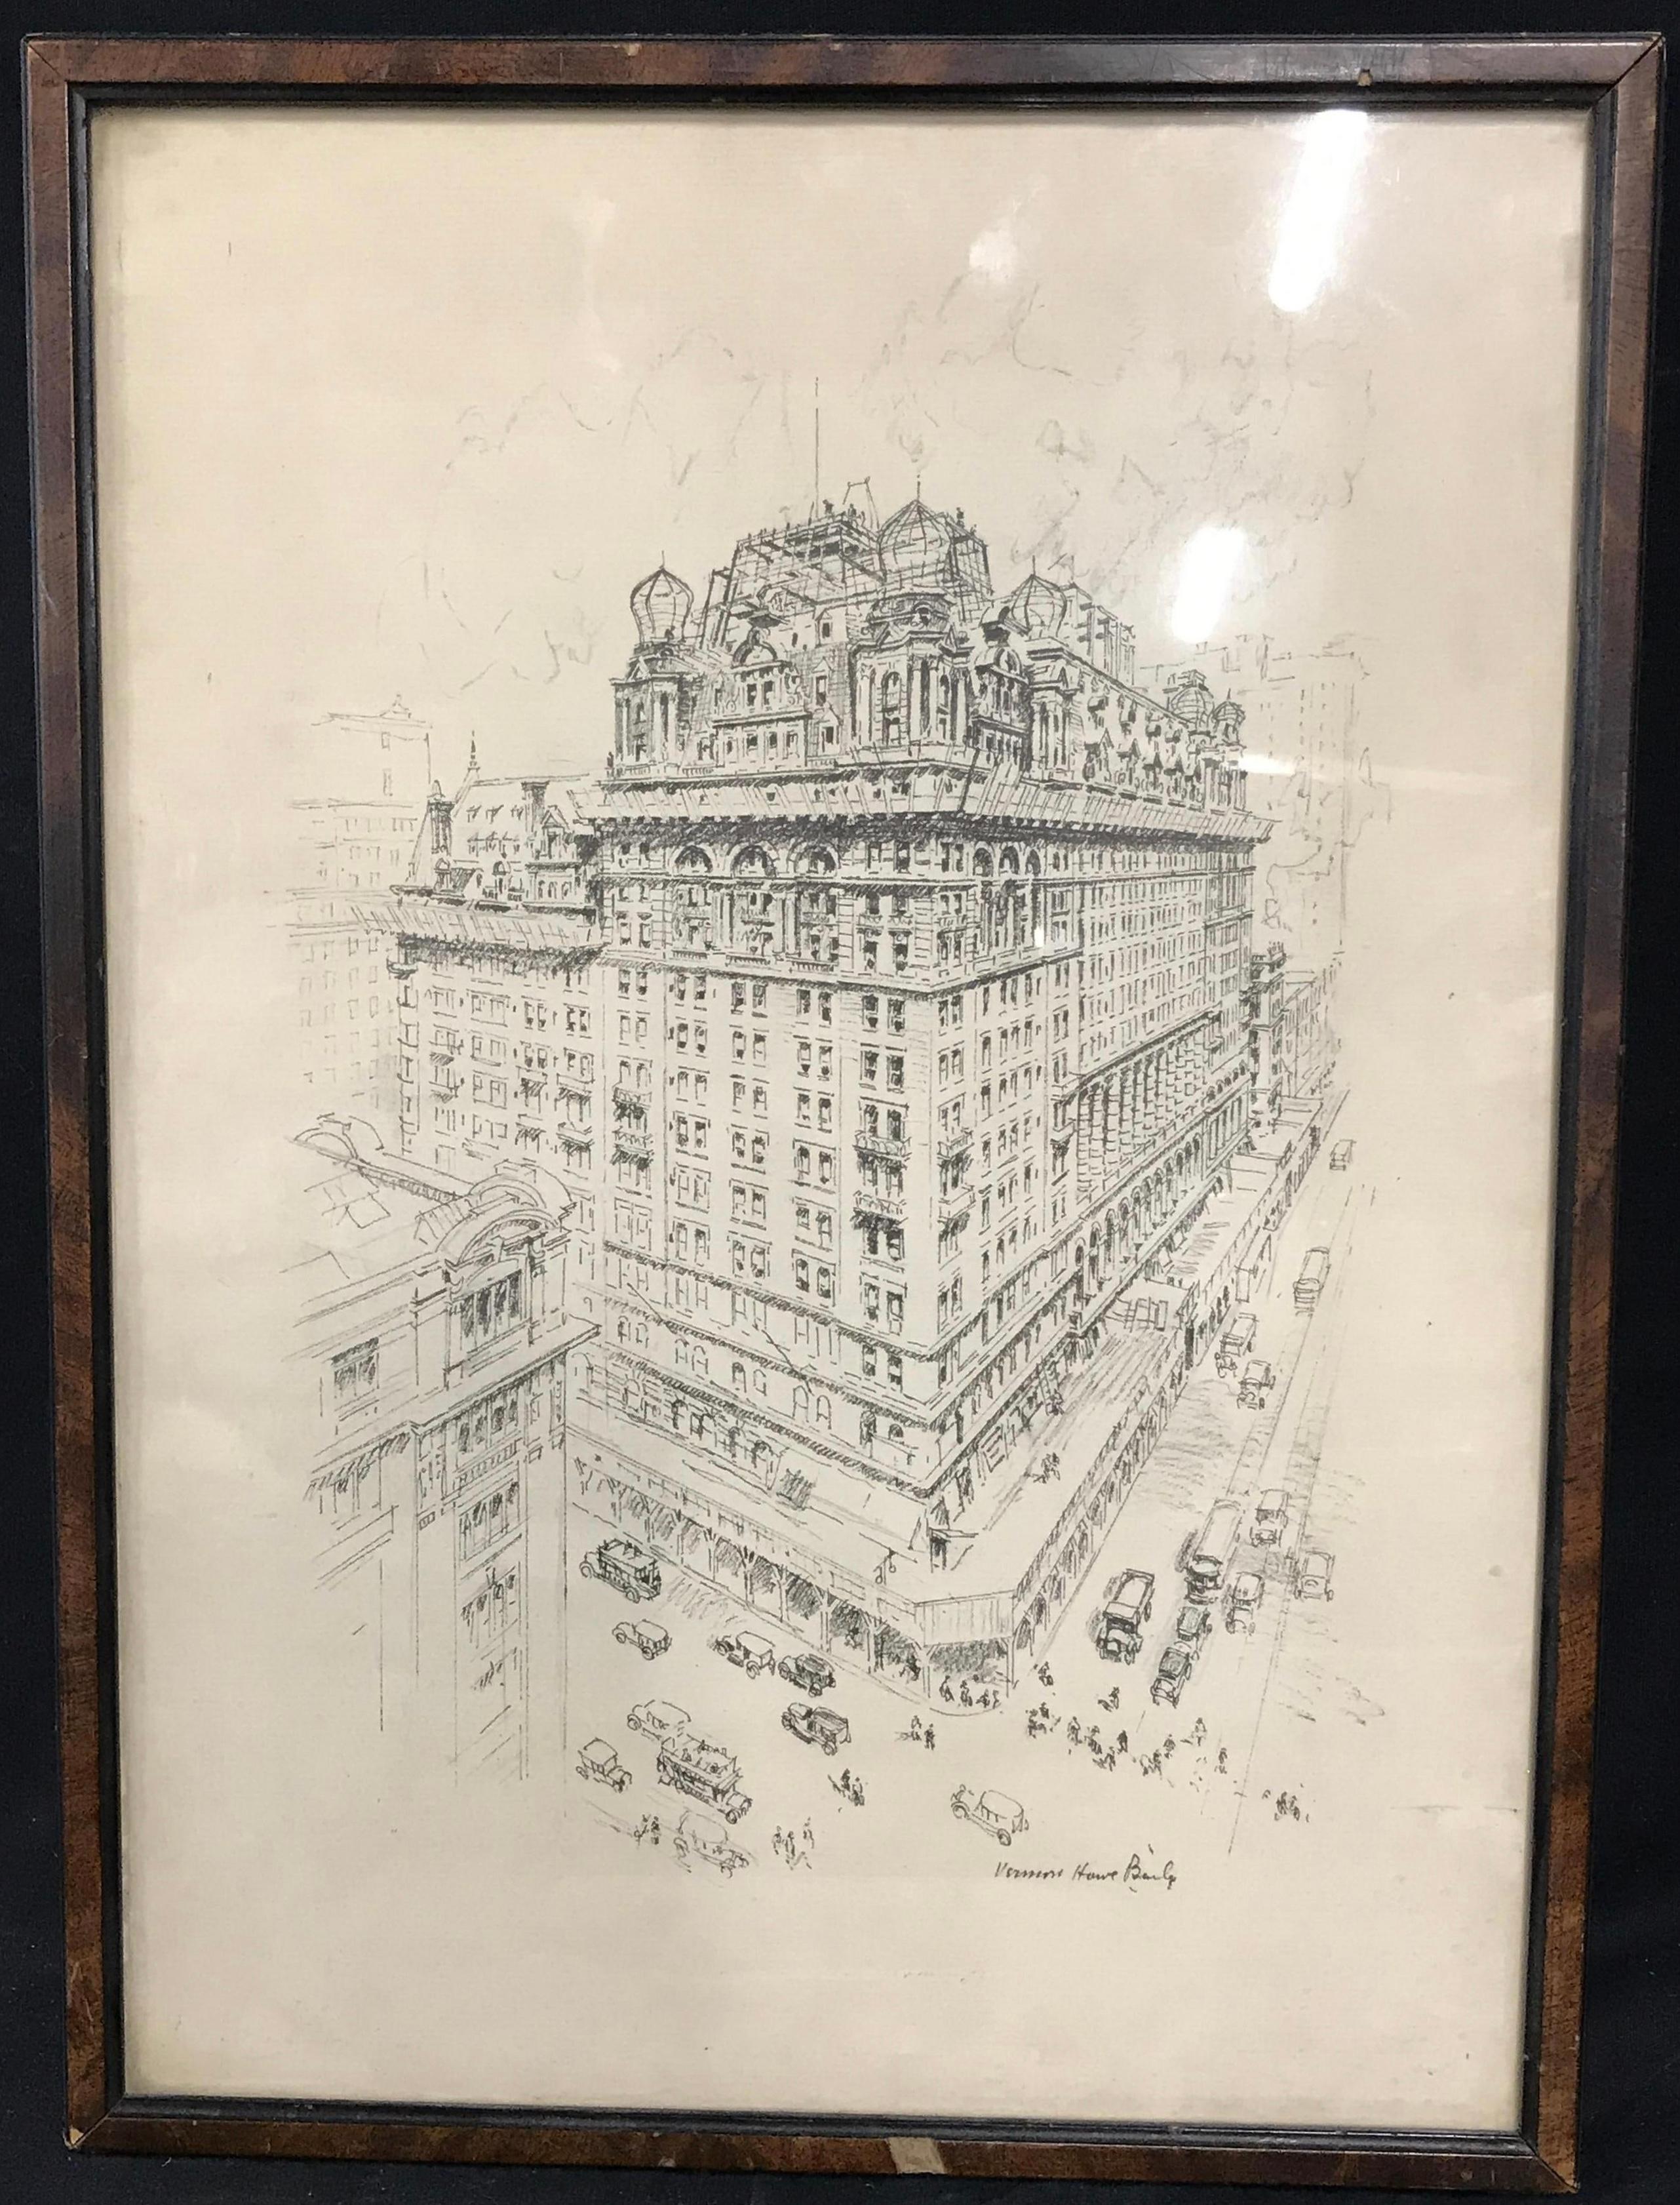 A signed Vernon Howe Bailey Signed lithograph of a building under construction in New York City in the classical style, on heavy weight paper. Vernon Howe Bailey was an American artist. After undertaking art studies, he was a staff member at The